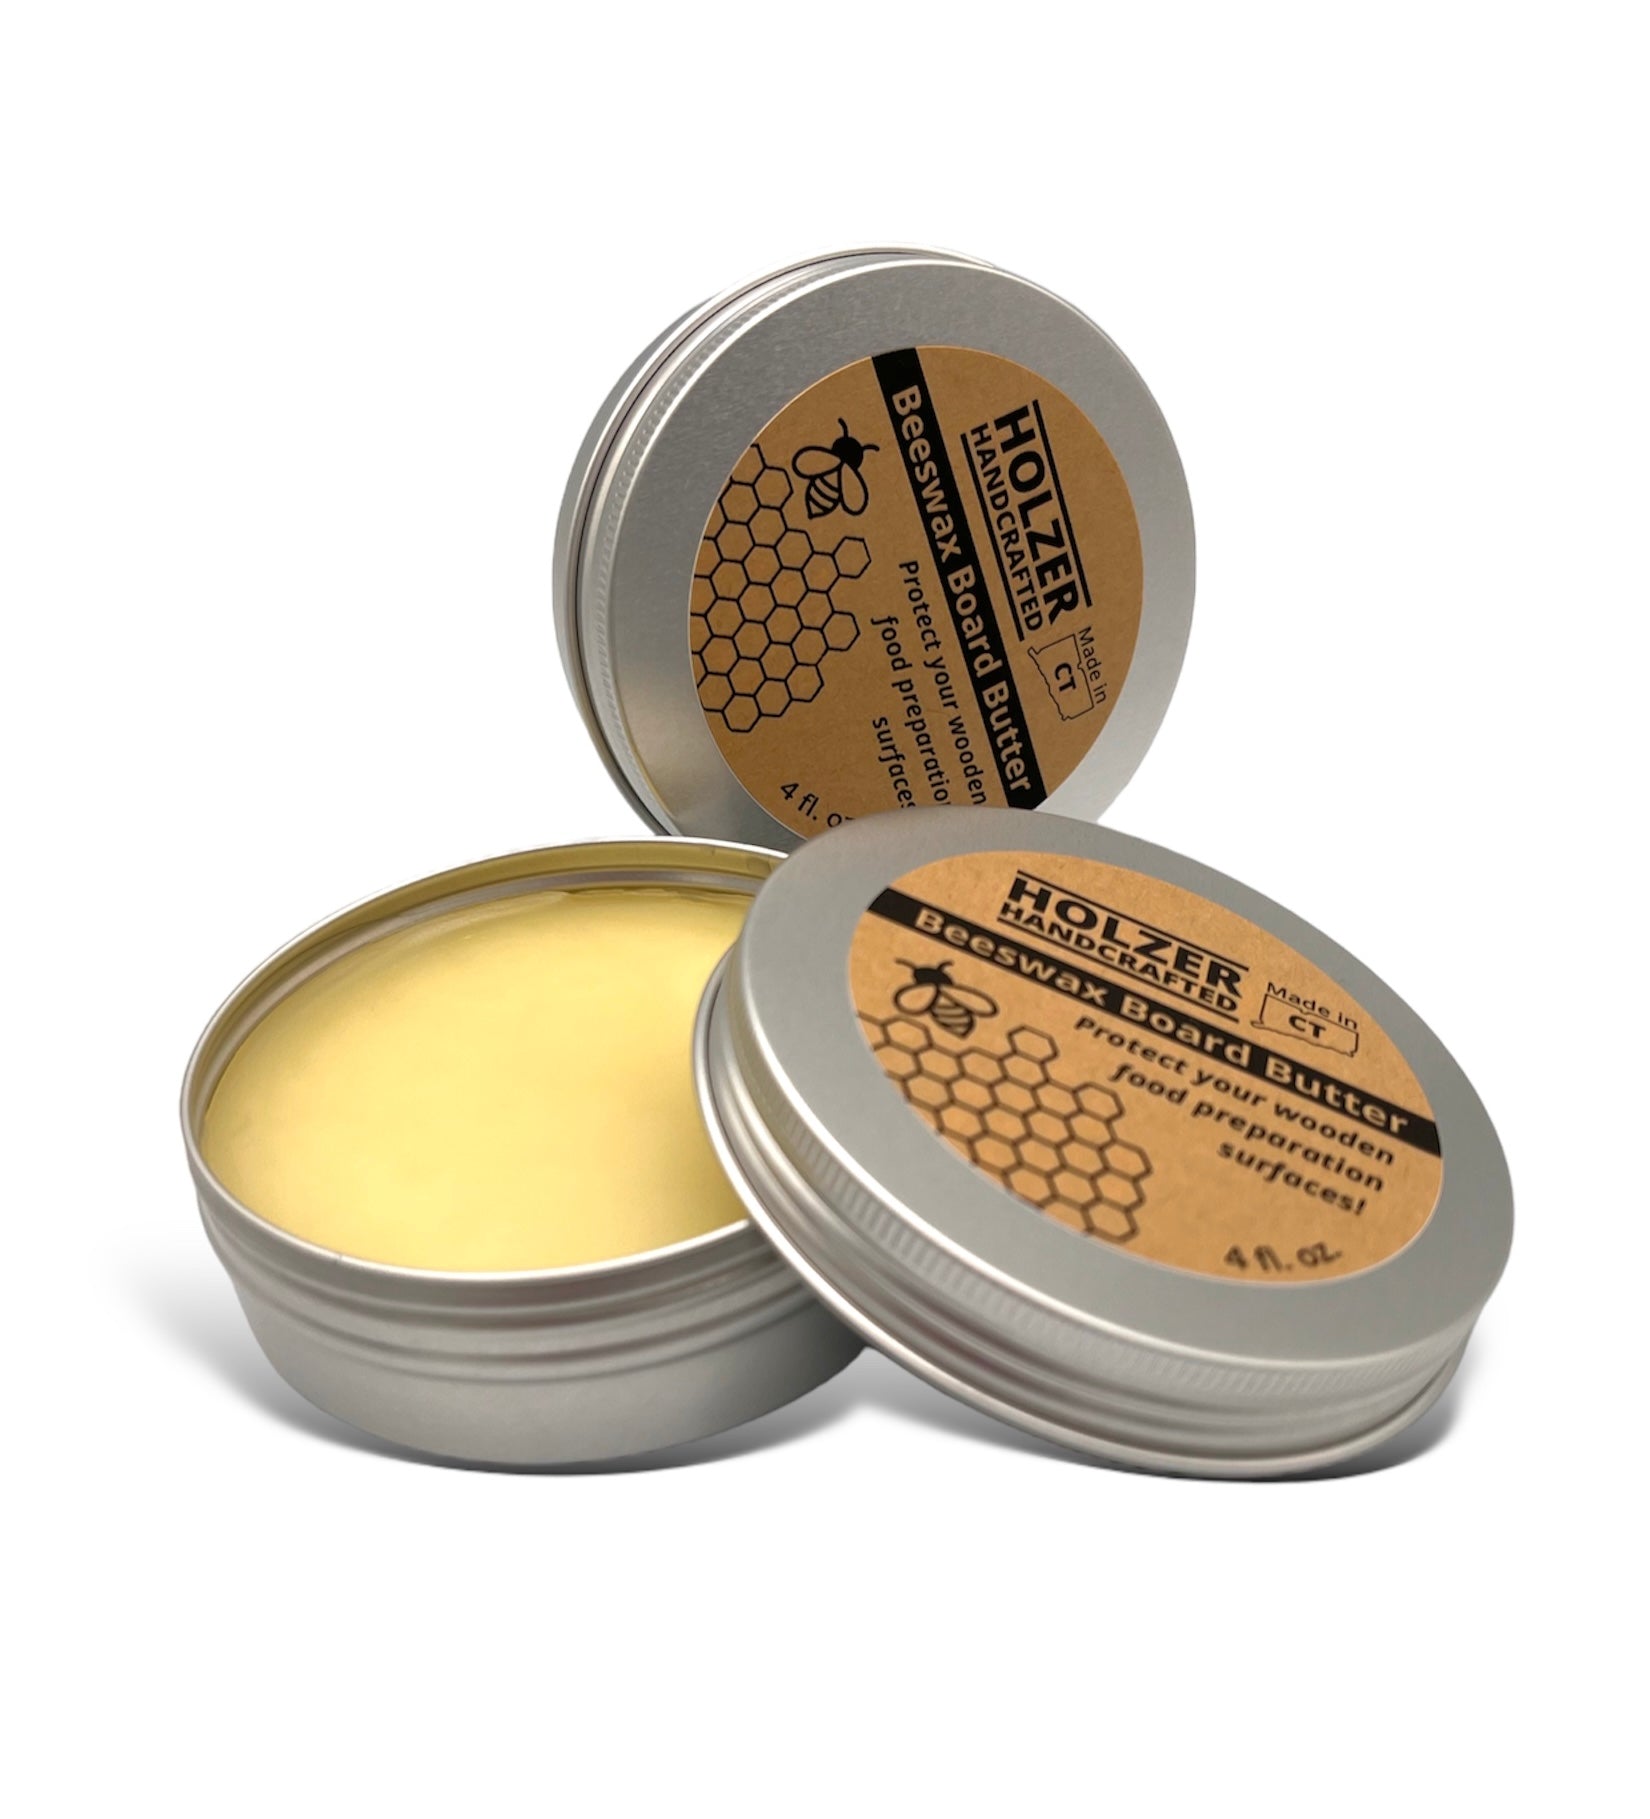 Beeswax Board Butter for Cutting Board Maintenance - 4 oz. Tin – Holzer  Handcrafted